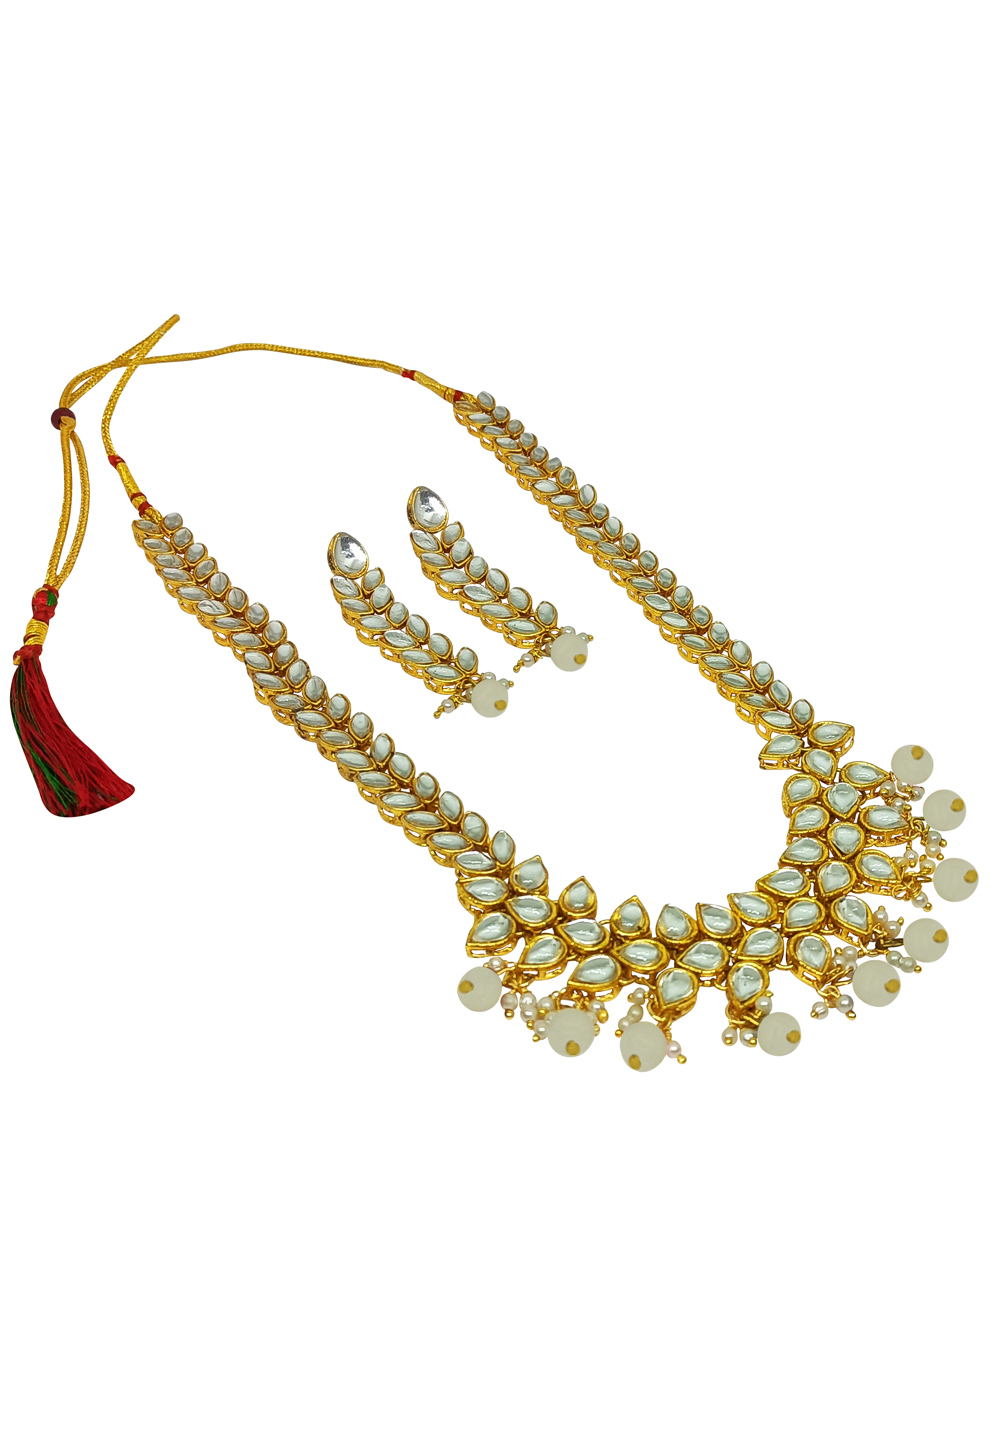 Off White Alloy Austrian Diamonds And Kundan Necklace Set With Earrings 269261